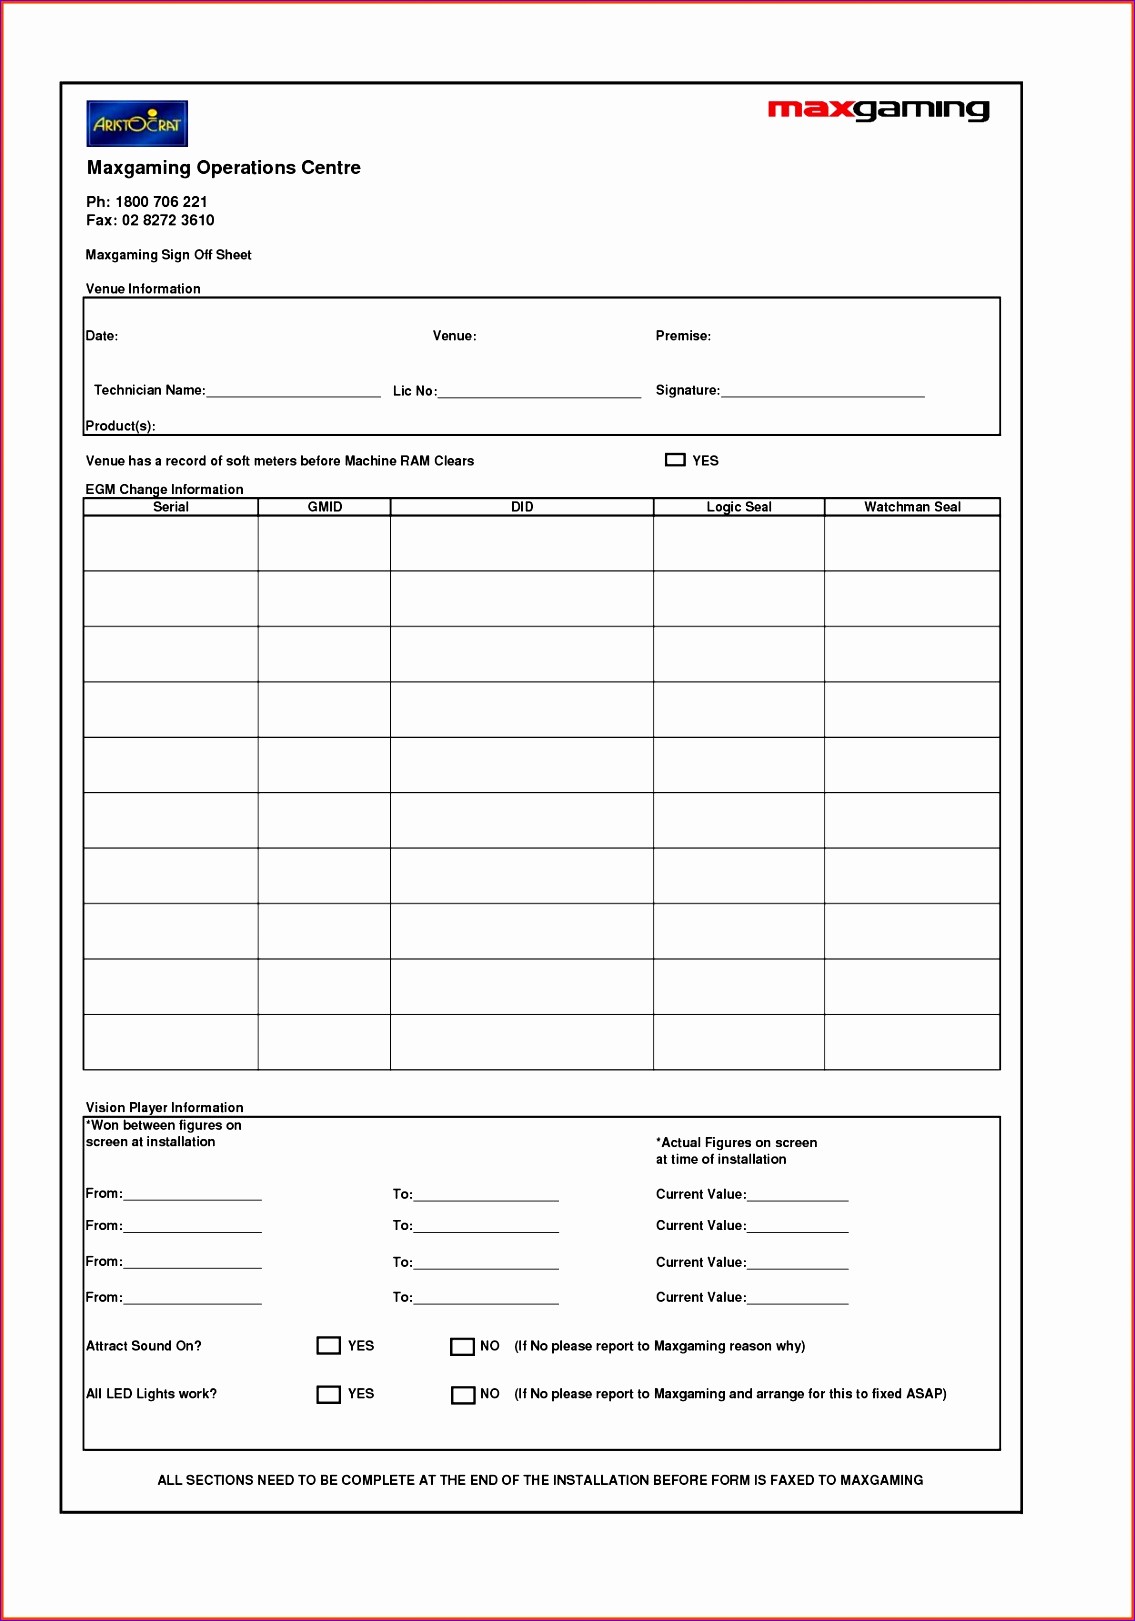 Sign Off Sheet Template Excel New 12 Sign F Sheet Template Excel Exceltemplates